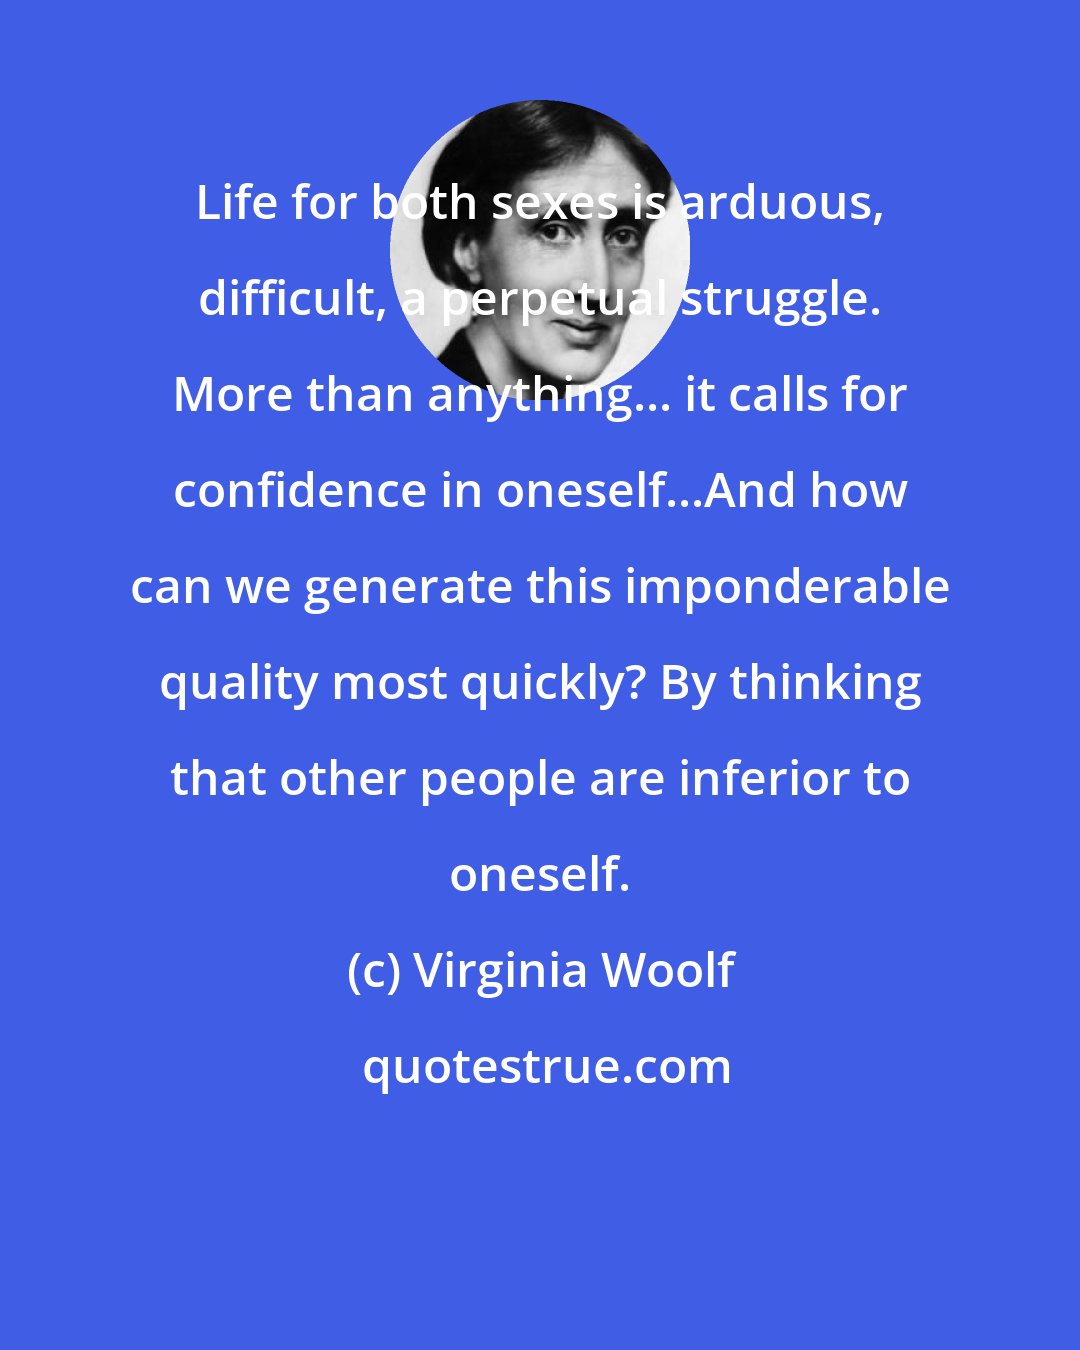 Virginia Woolf: Life for both sexes is arduous, difficult, a perpetual struggle. More than anything... it calls for confidence in oneself...And how can we generate this imponderable quality most quickly? By thinking that other people are inferior to oneself.